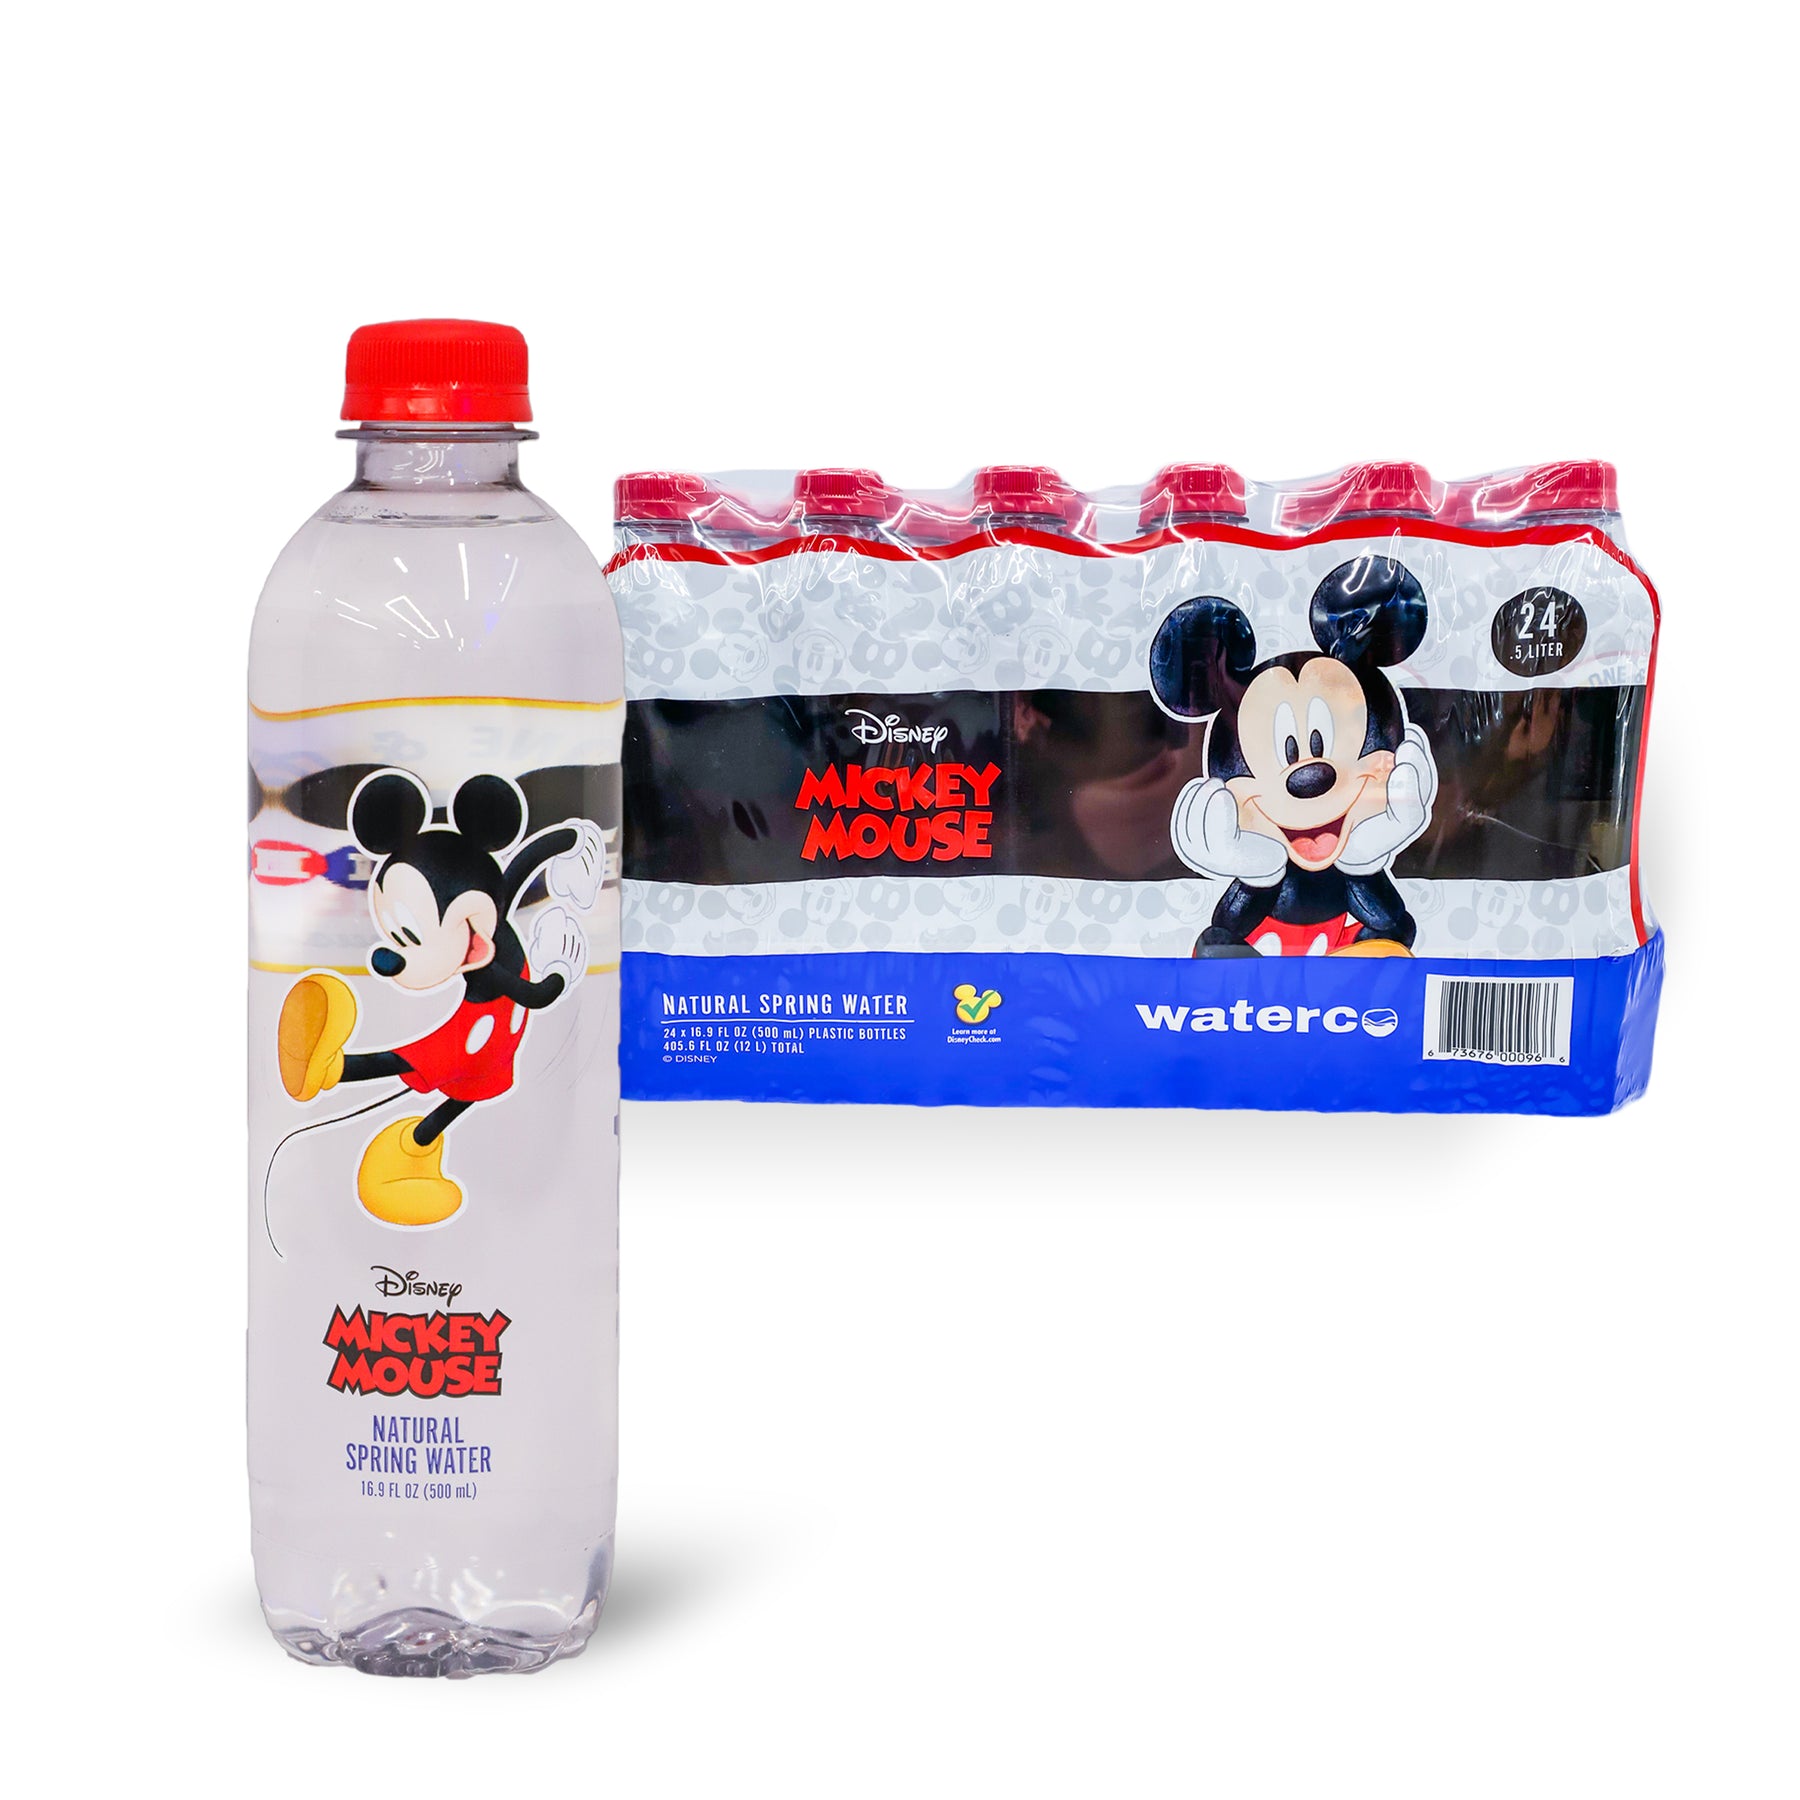 Disney Mickey Mouse Square Lunch Cooler Bag | Igloo